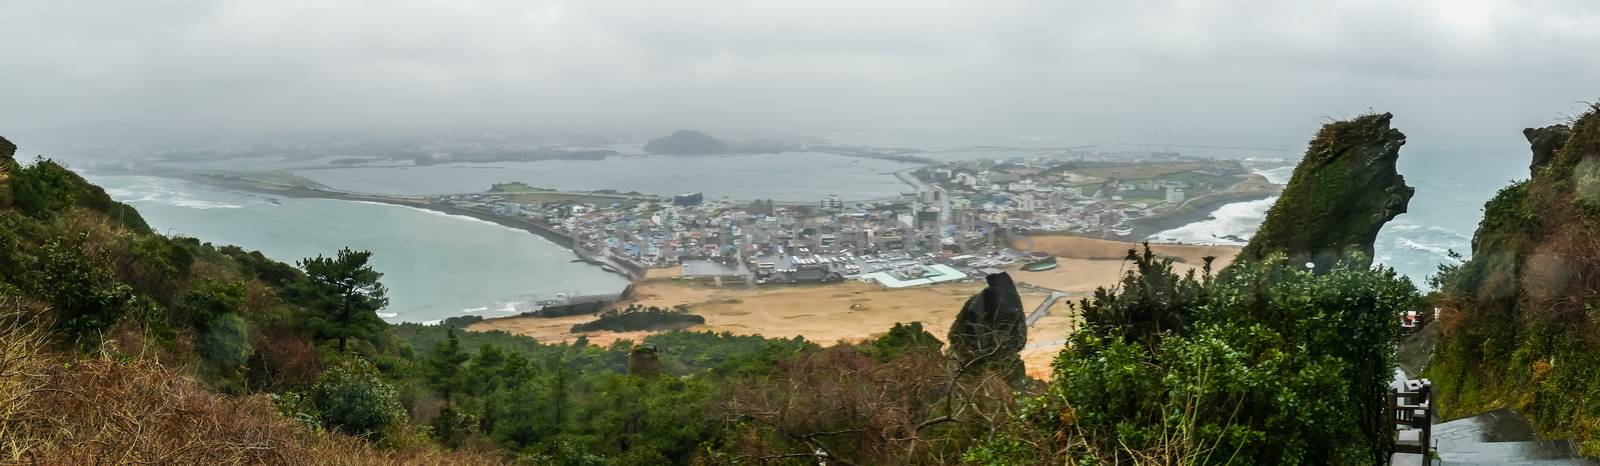 Seongsan Ilchulbong, a volcano on The Jeju Island. Has been recorded as a World Heritage Site by the UNESCO organization.